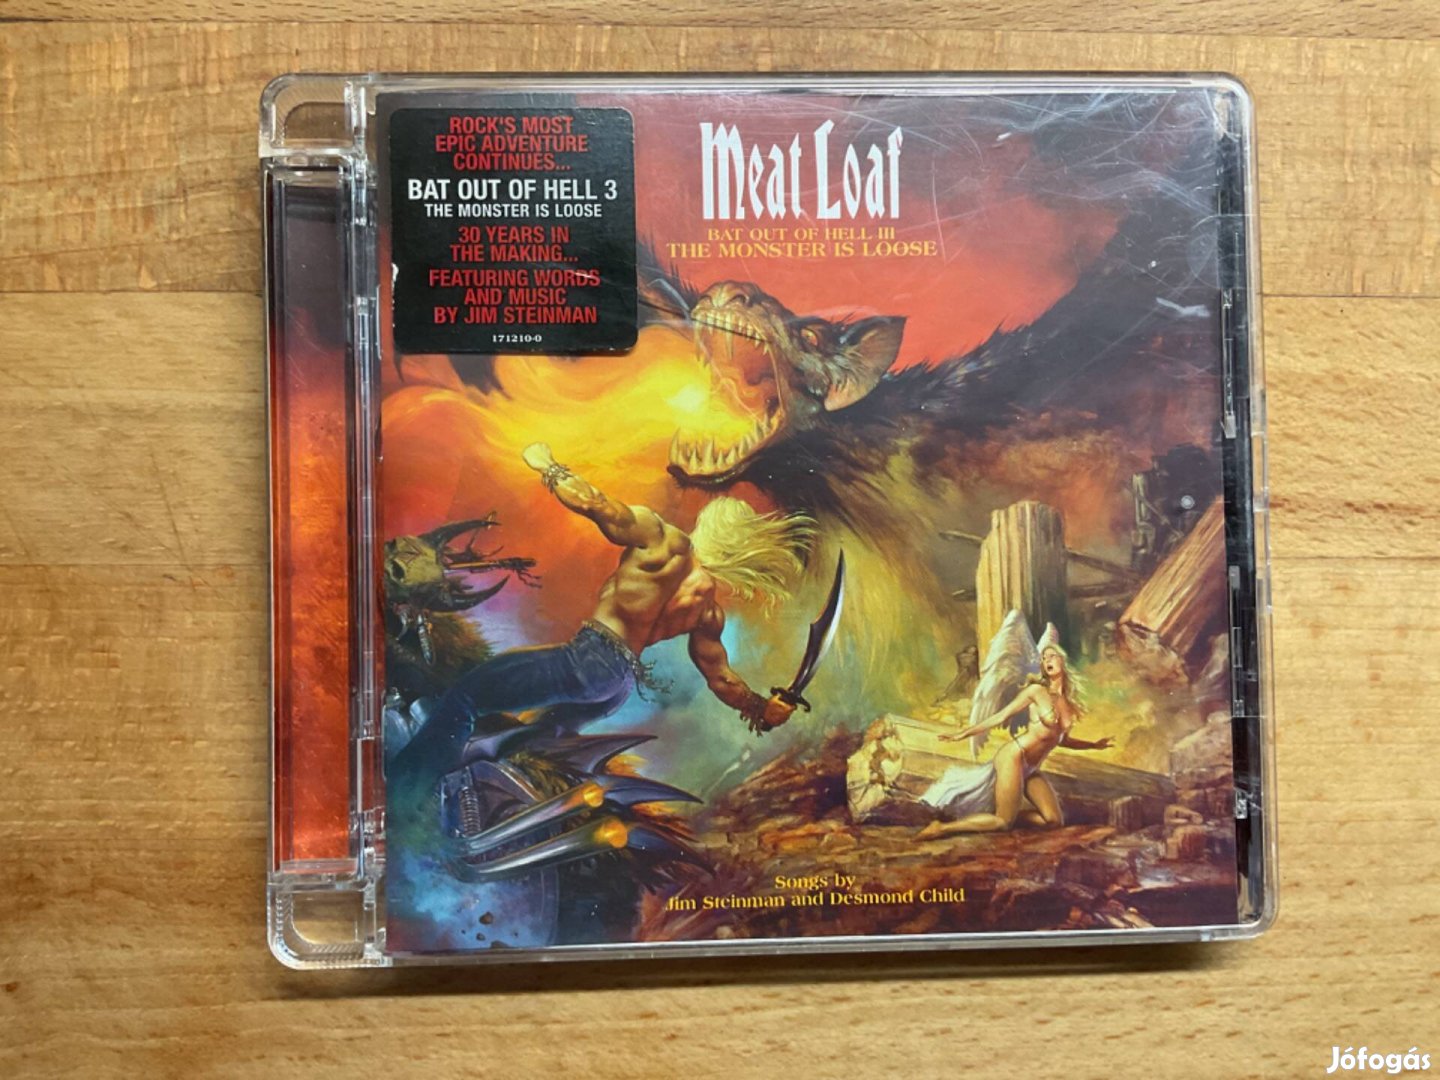 Meat Loaf- Bat Out Of Hell III, cd lemez